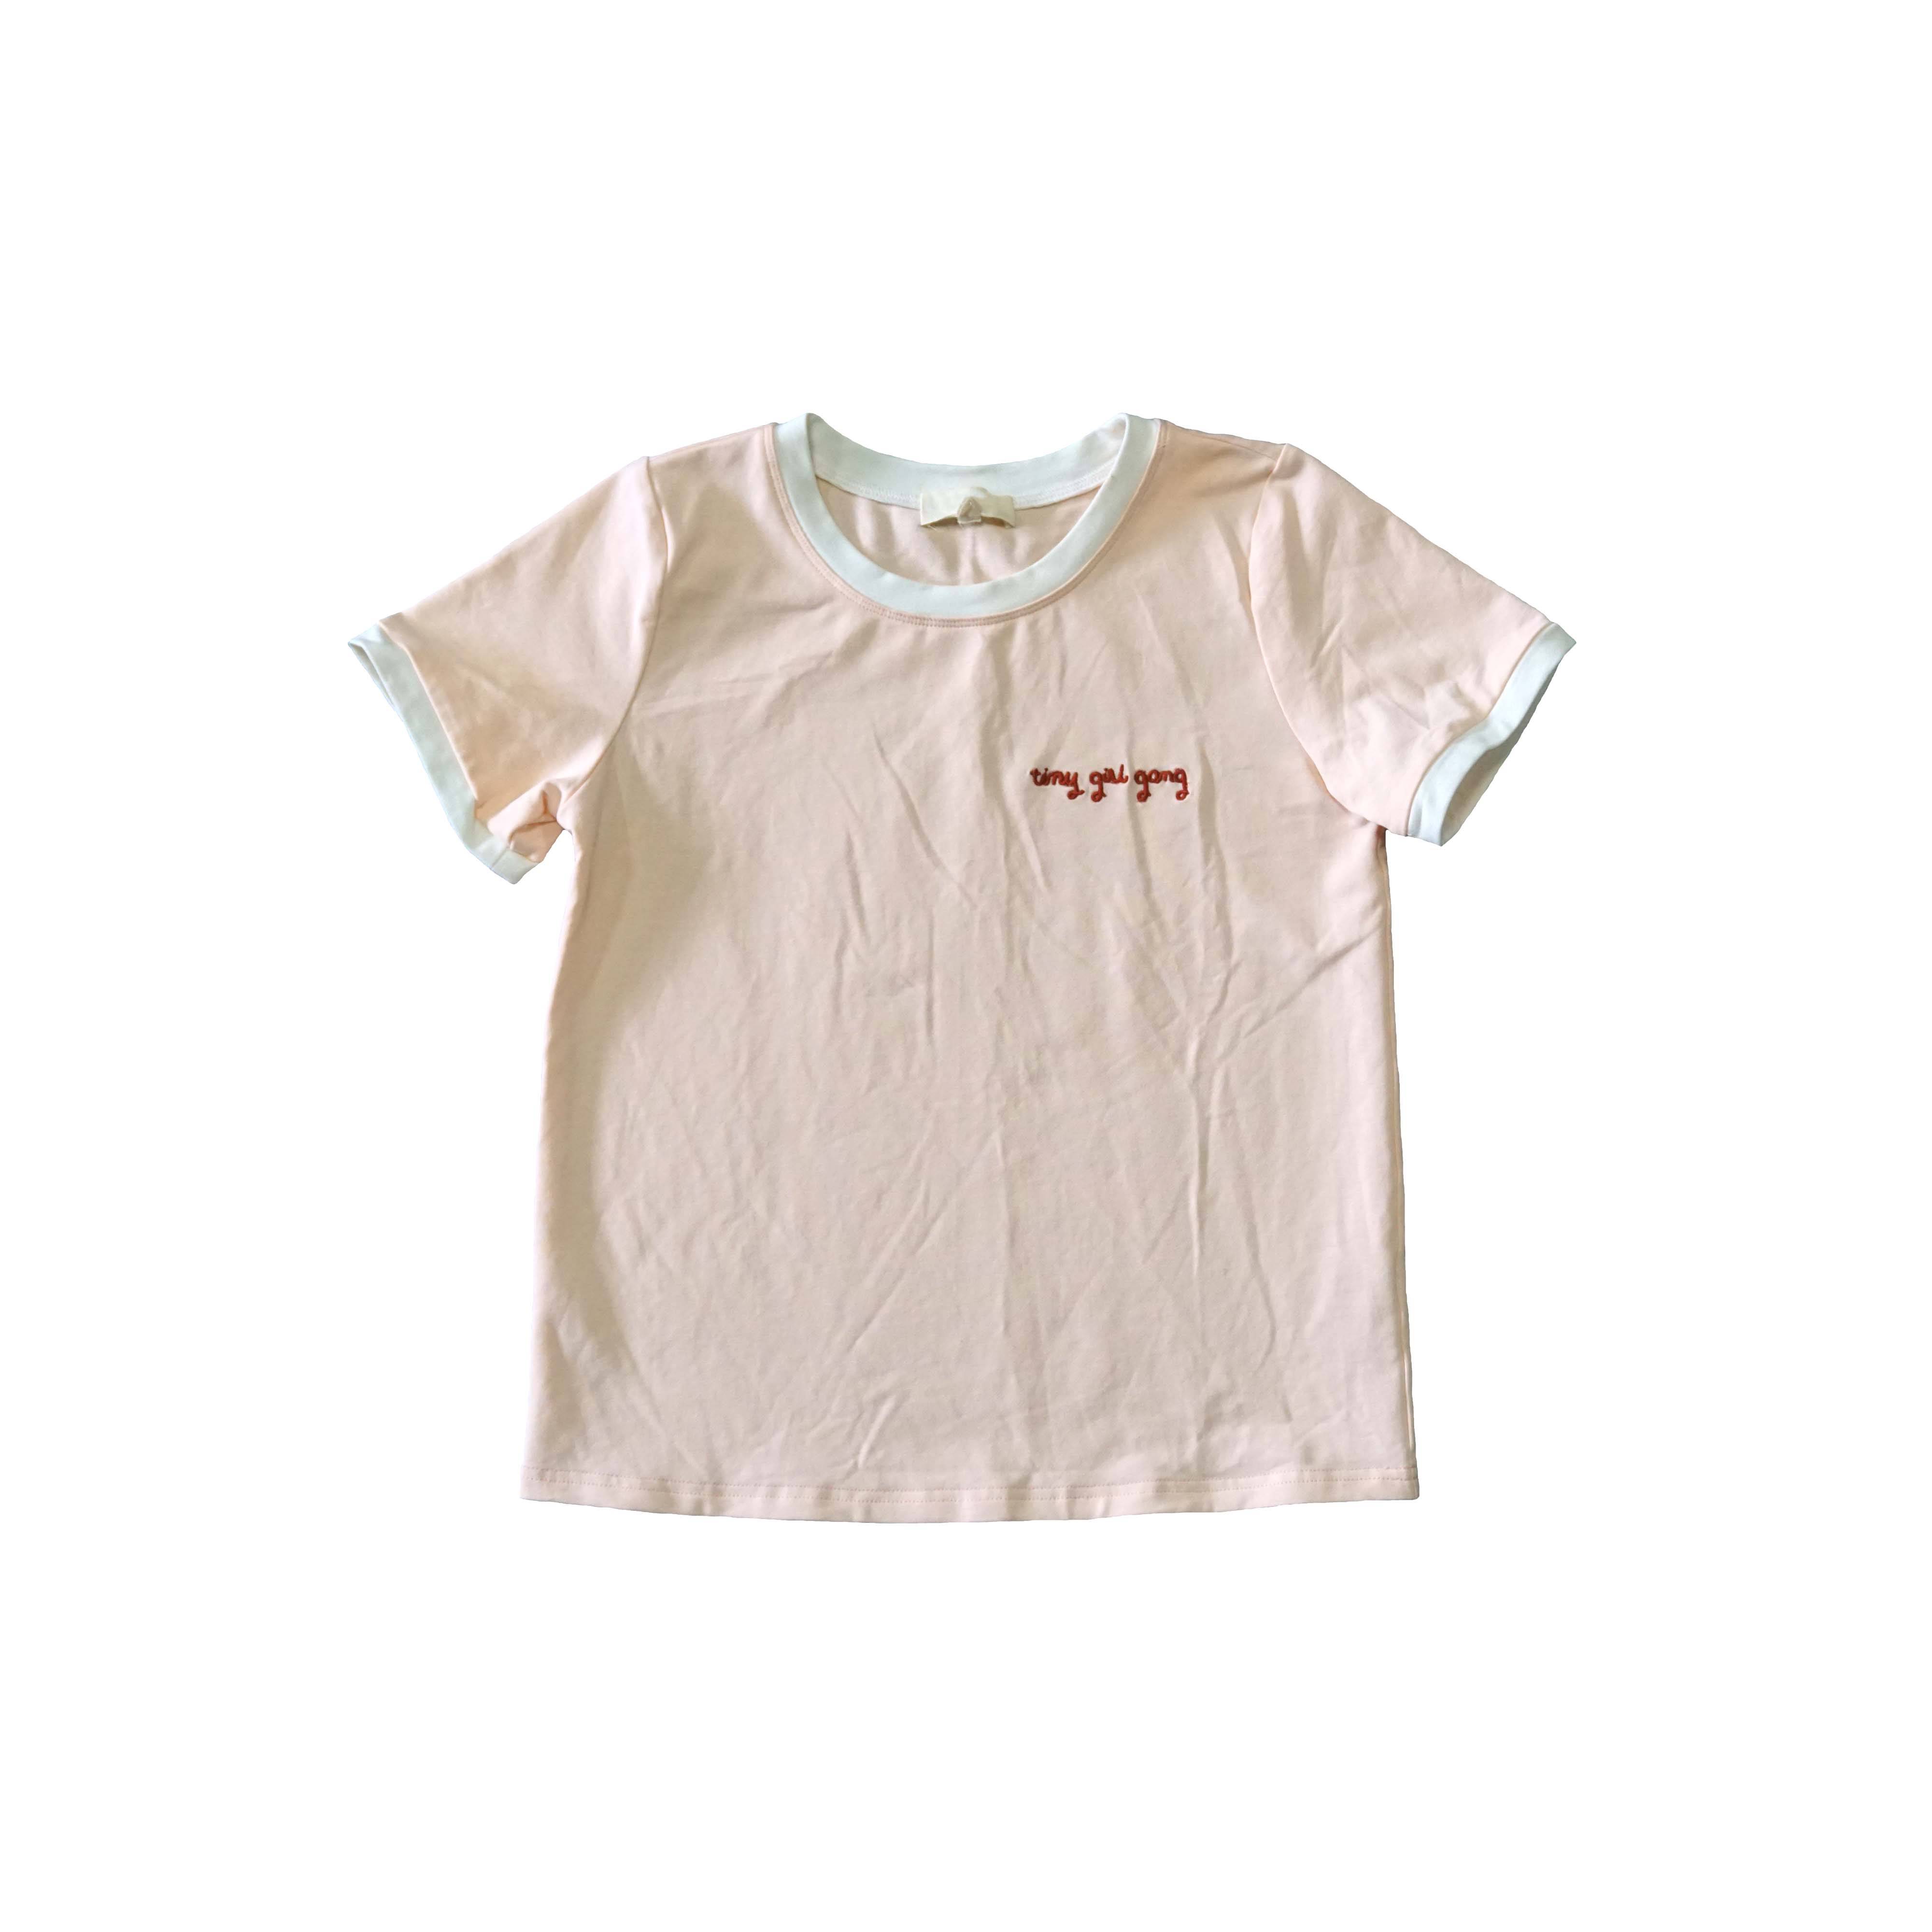 Adorable and innocent embroideried pink children’s T-shirt